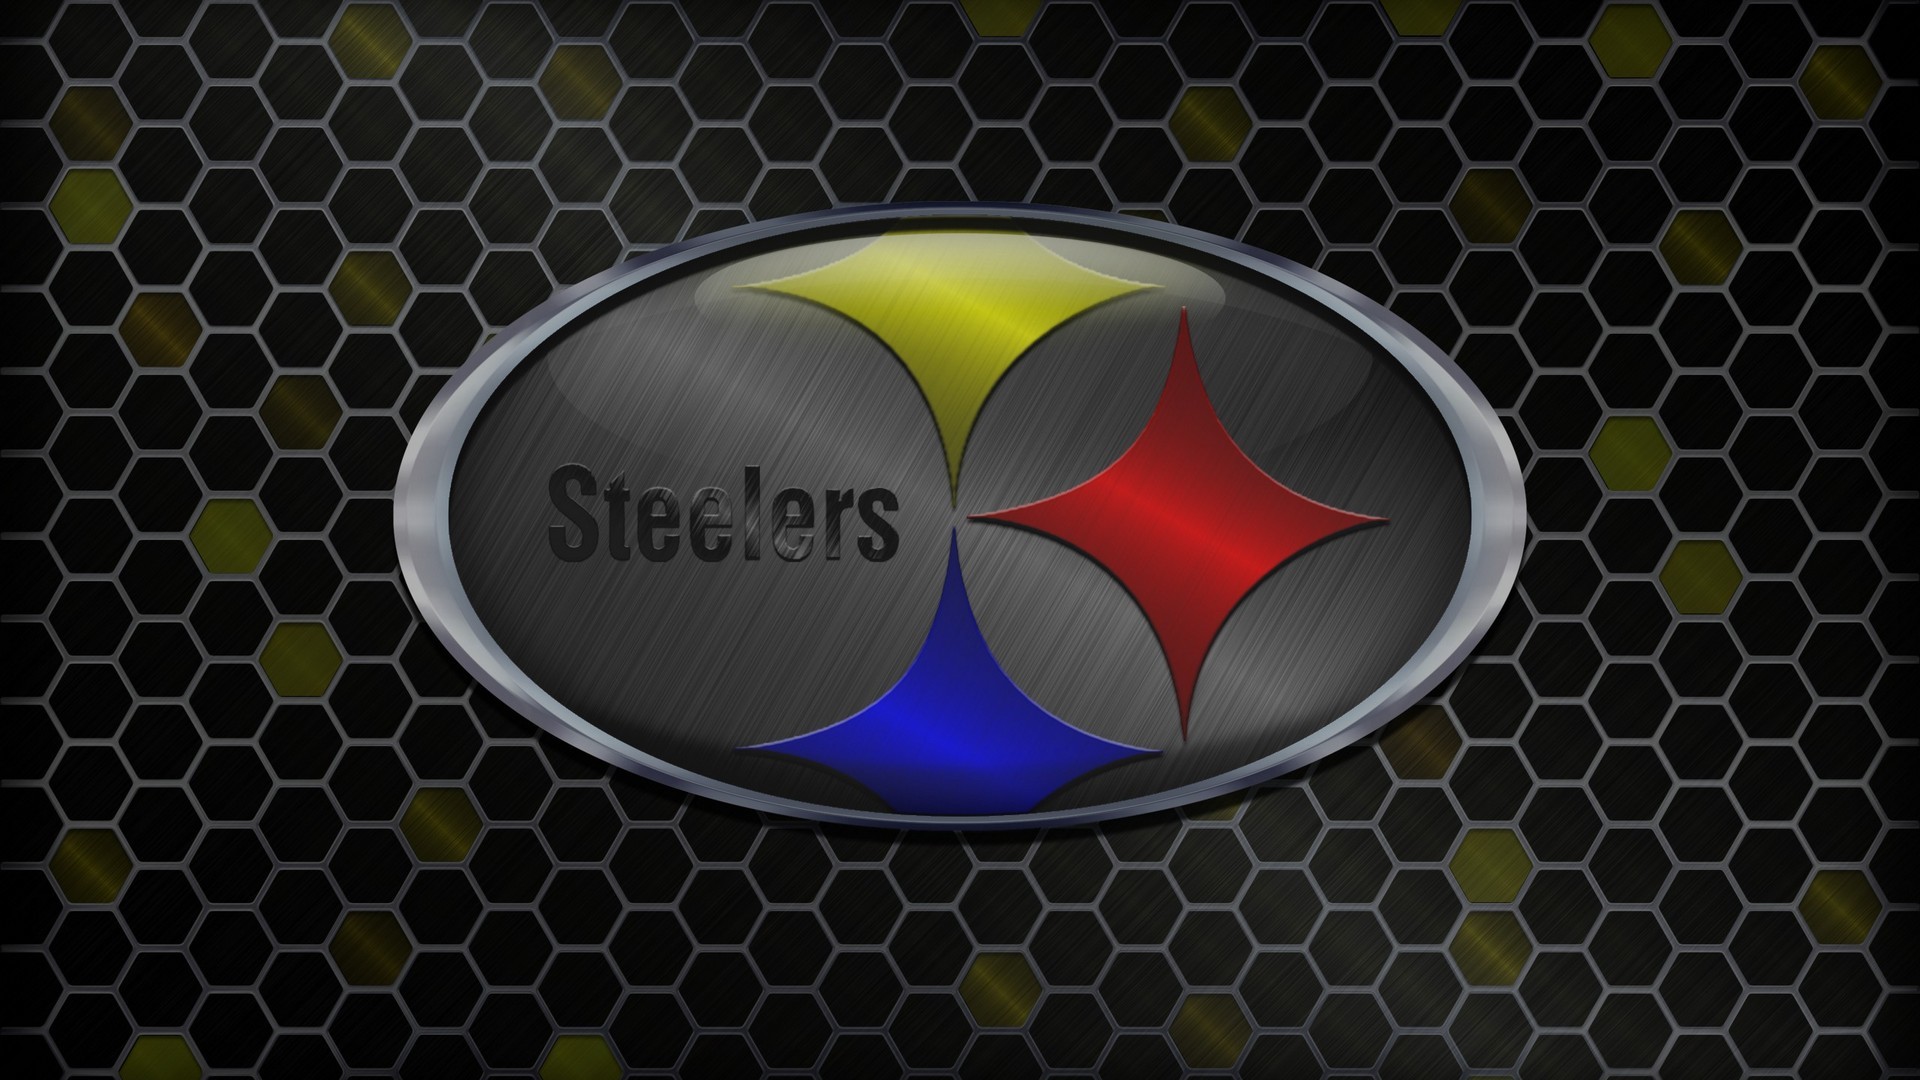 1920x1080 Windows Wallpaper Pittsburgh Steelers with resolution  pixel. You  can make this wallpaper for your